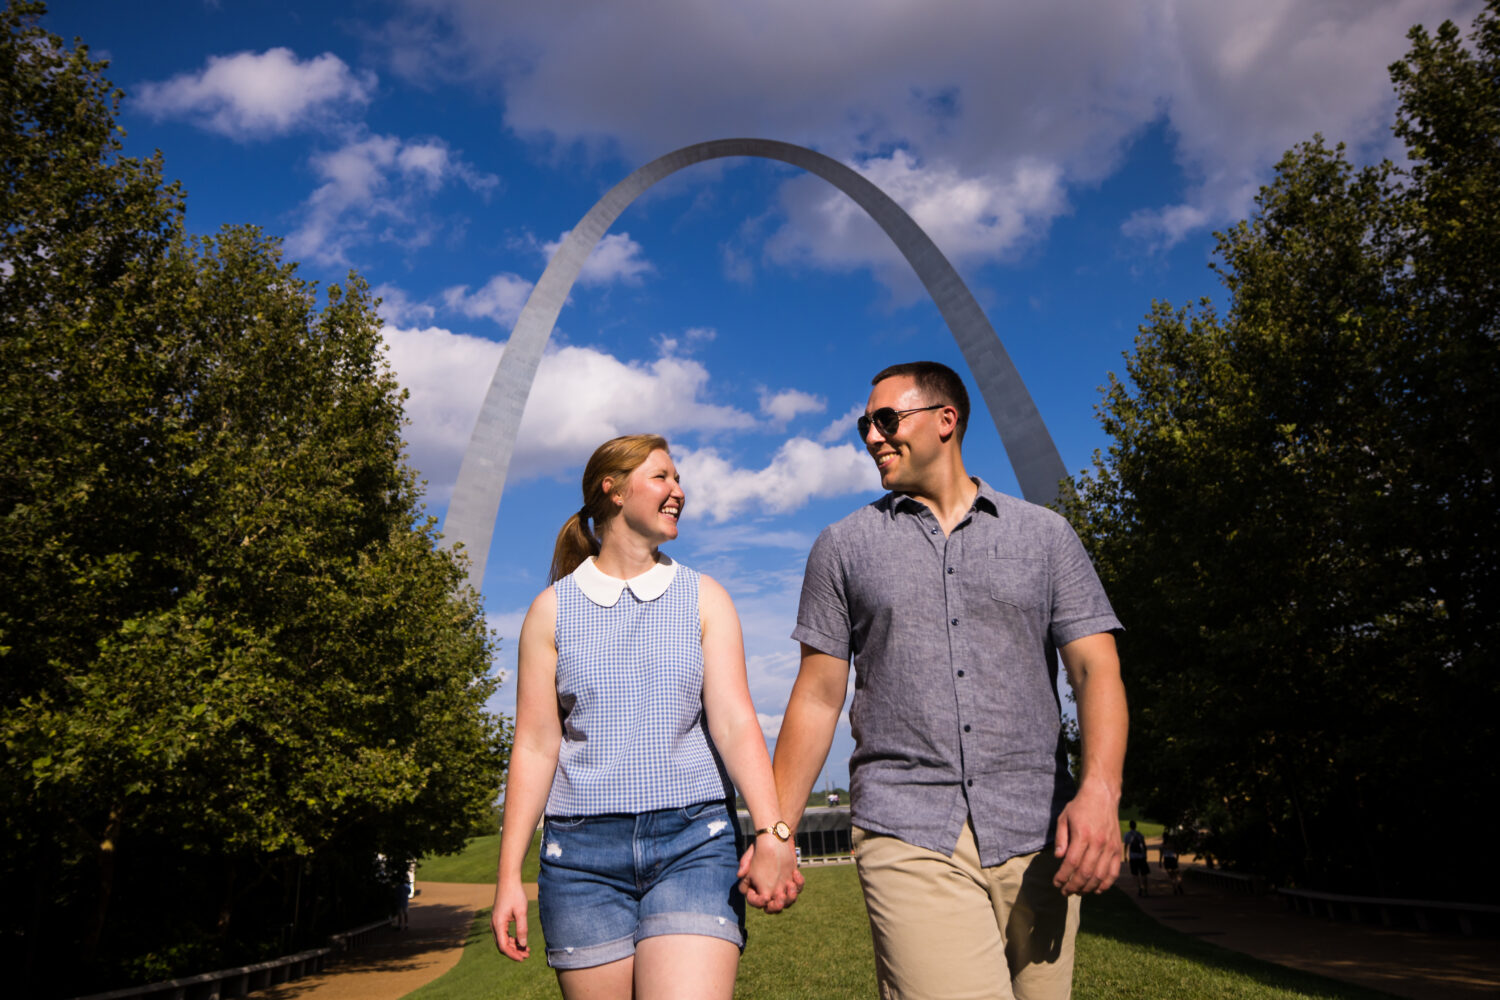 Creative Proposal Photographer, lisa rhinehart, captures this unique, vibrant, fun image of this couple in st louis Missouri with the arch behind them as they walk away from it holding hands and smiling at one another